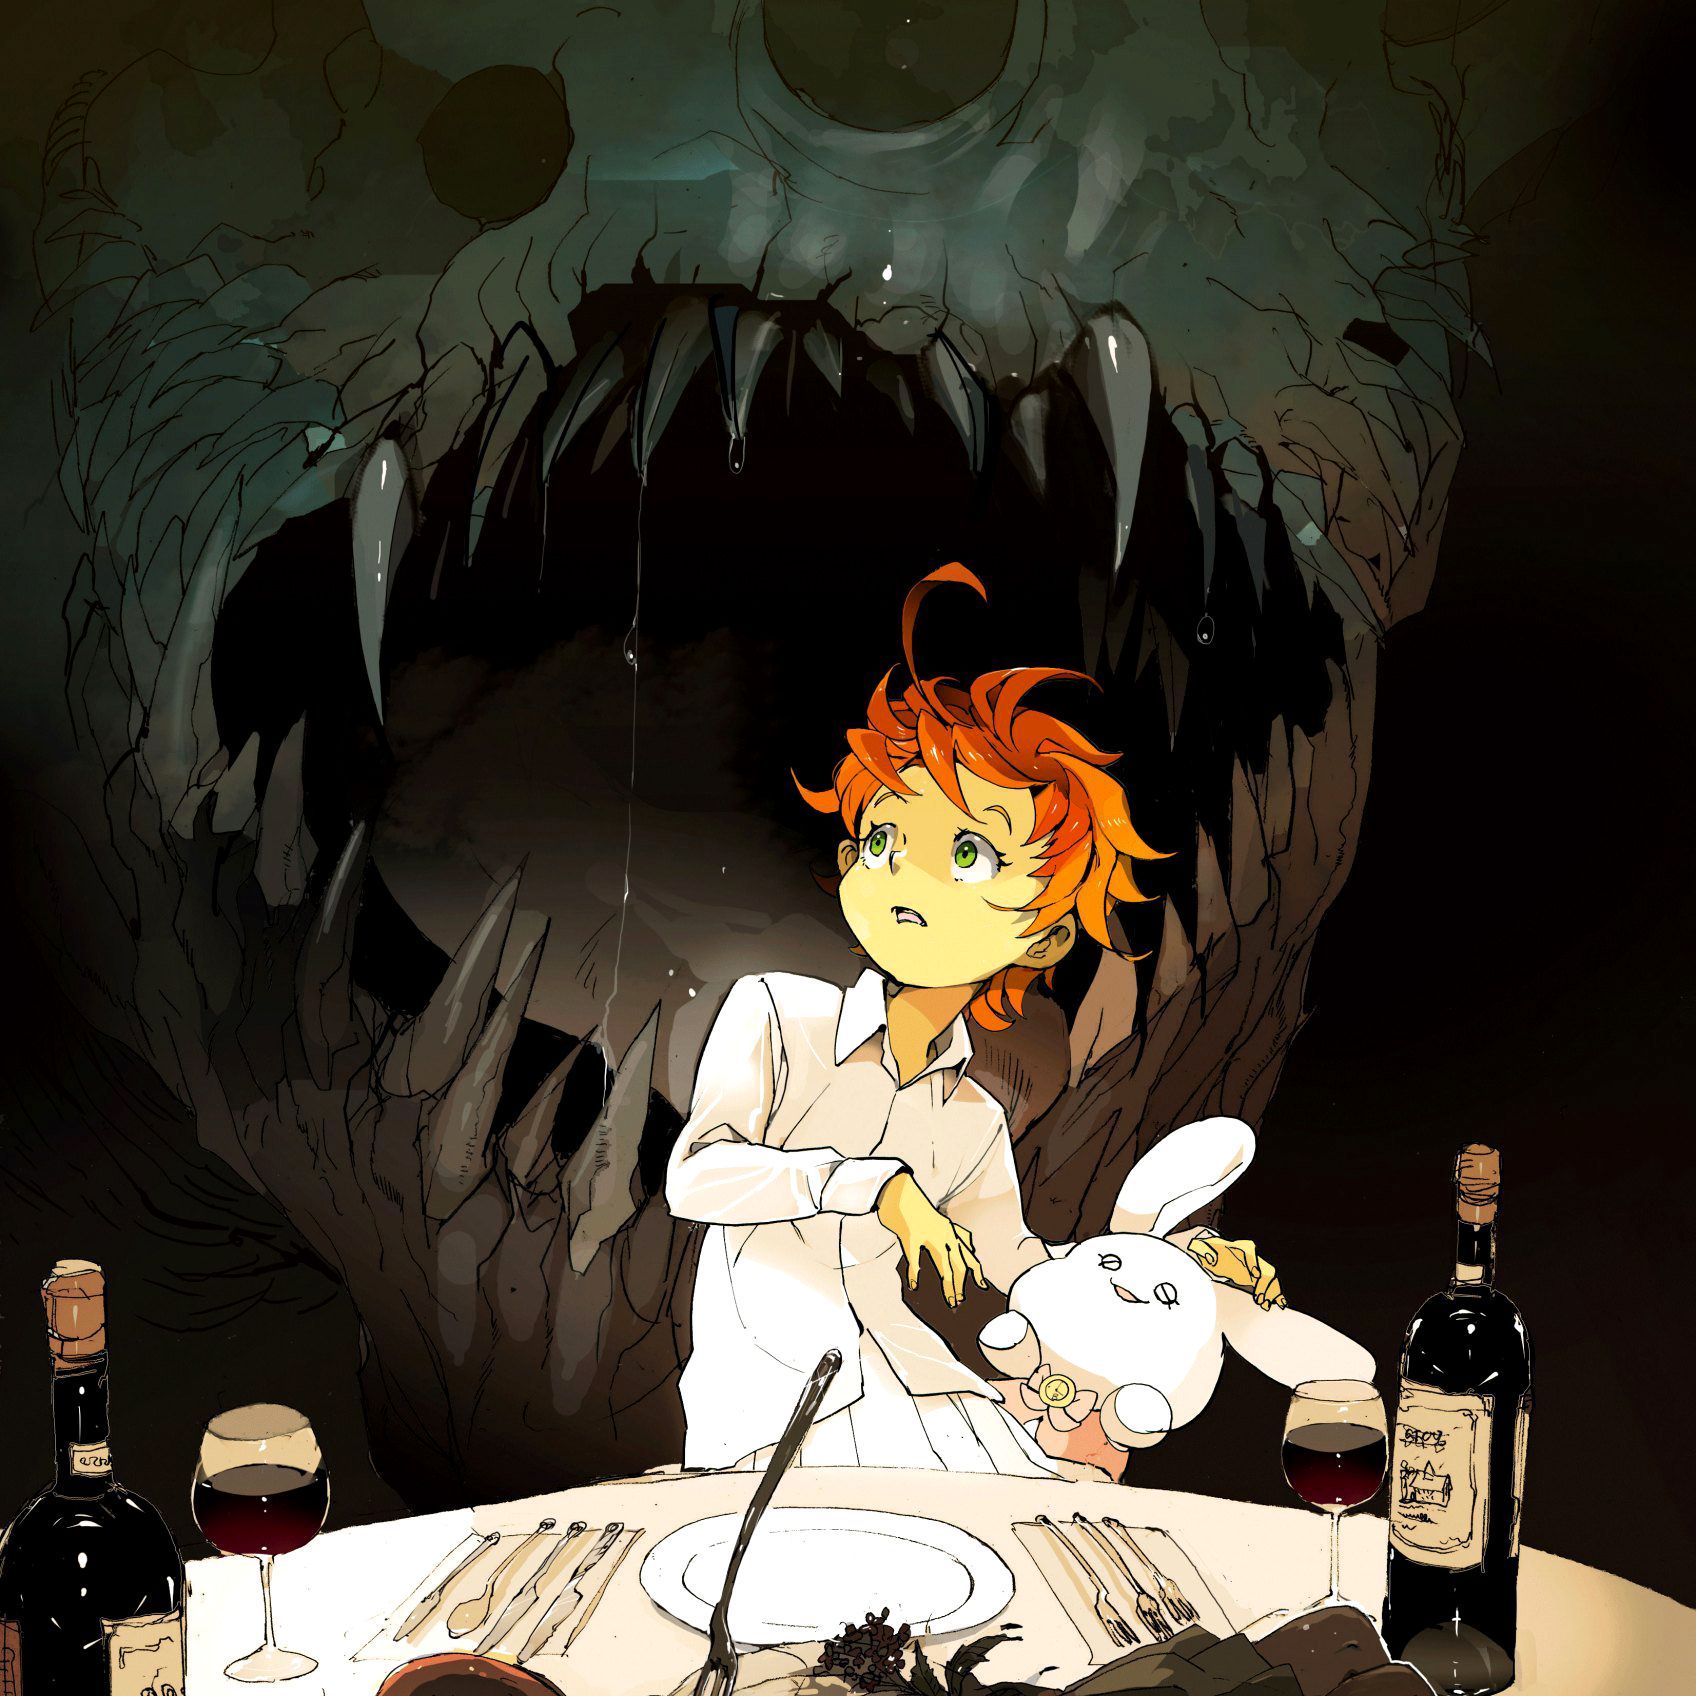 New English Subbed for The Anime THE PROMISED NEVERLAND